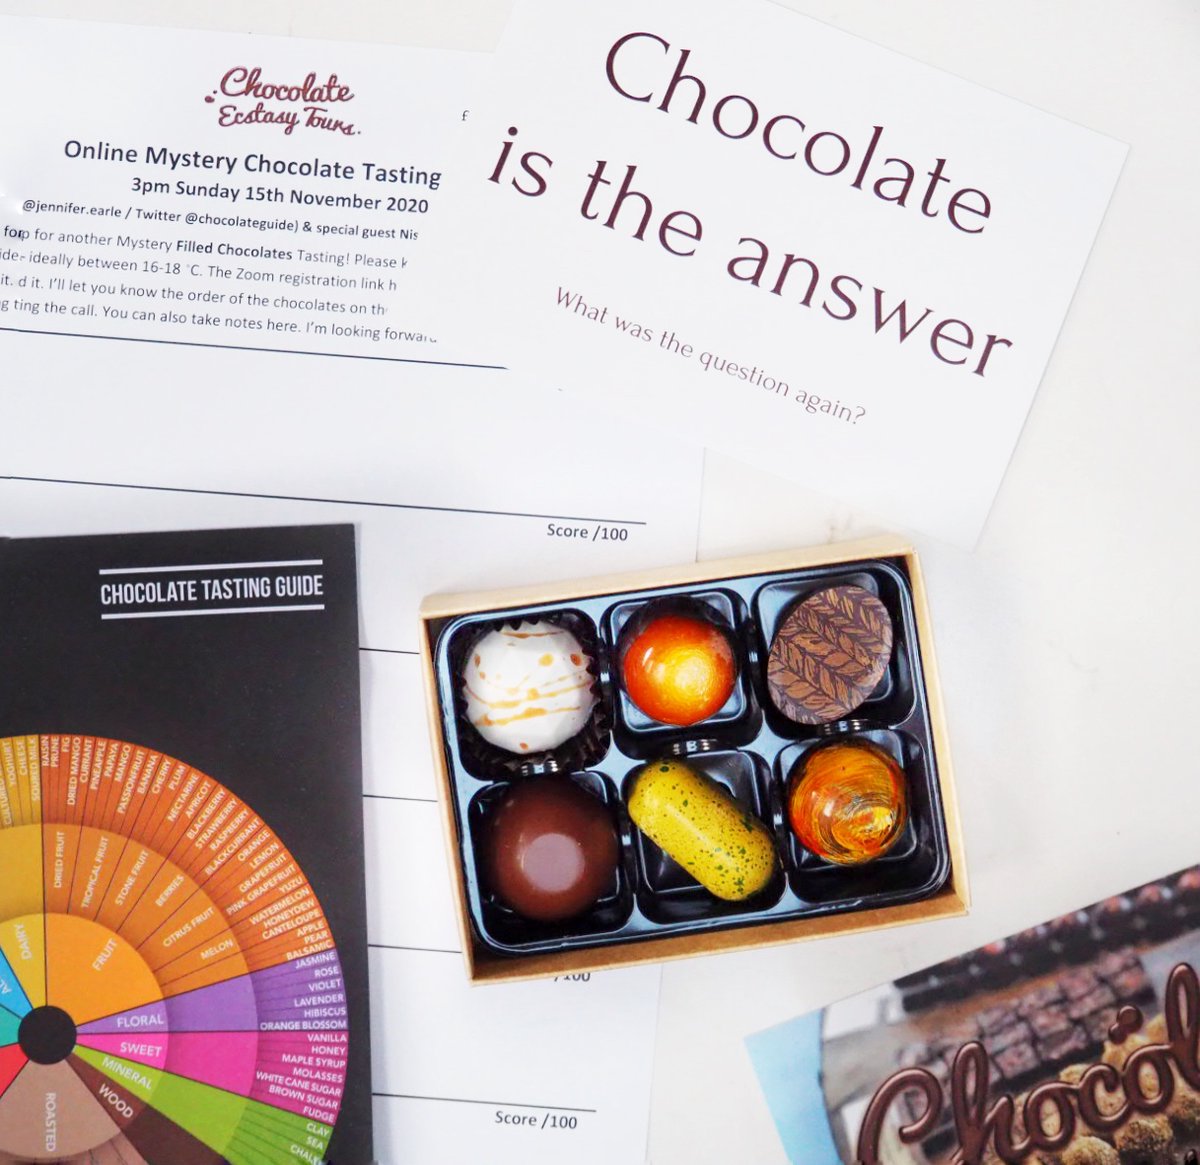 And from  @chocolatetours we highly recommend a gift certificate for their new online Mystery Chocolate Truffle Tastings where you can taste handpicked truffles along with a foodie guest.  #ChocolateTastings  #LockdownActivity